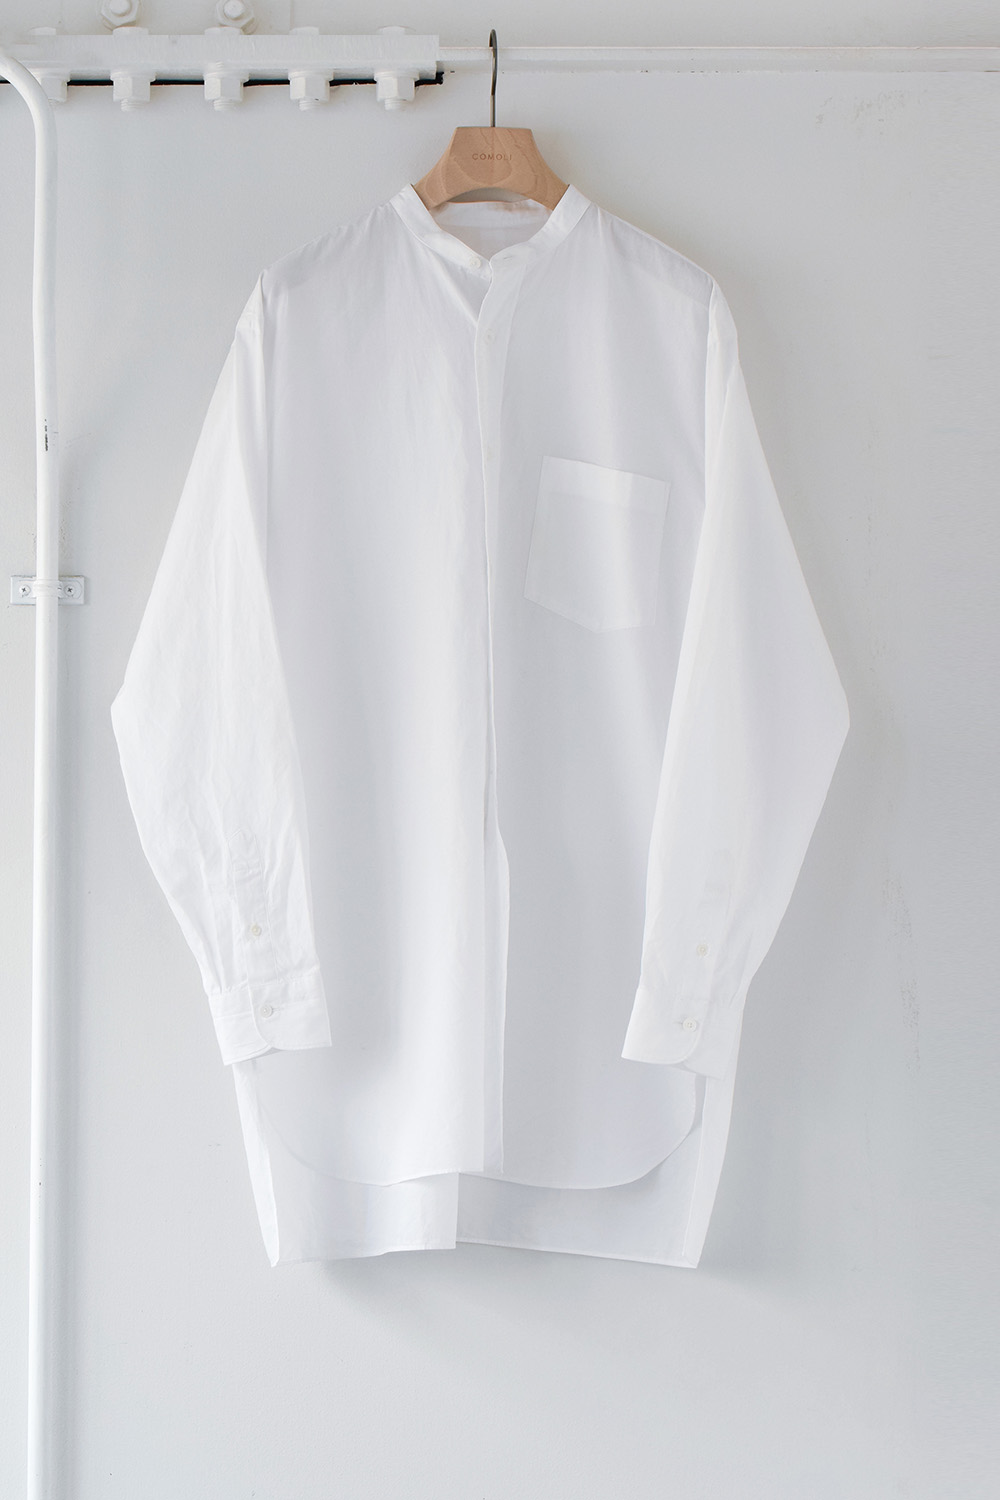 “COMOLI” 2nd Delivery 23aw Collection｜Journal｜BARD